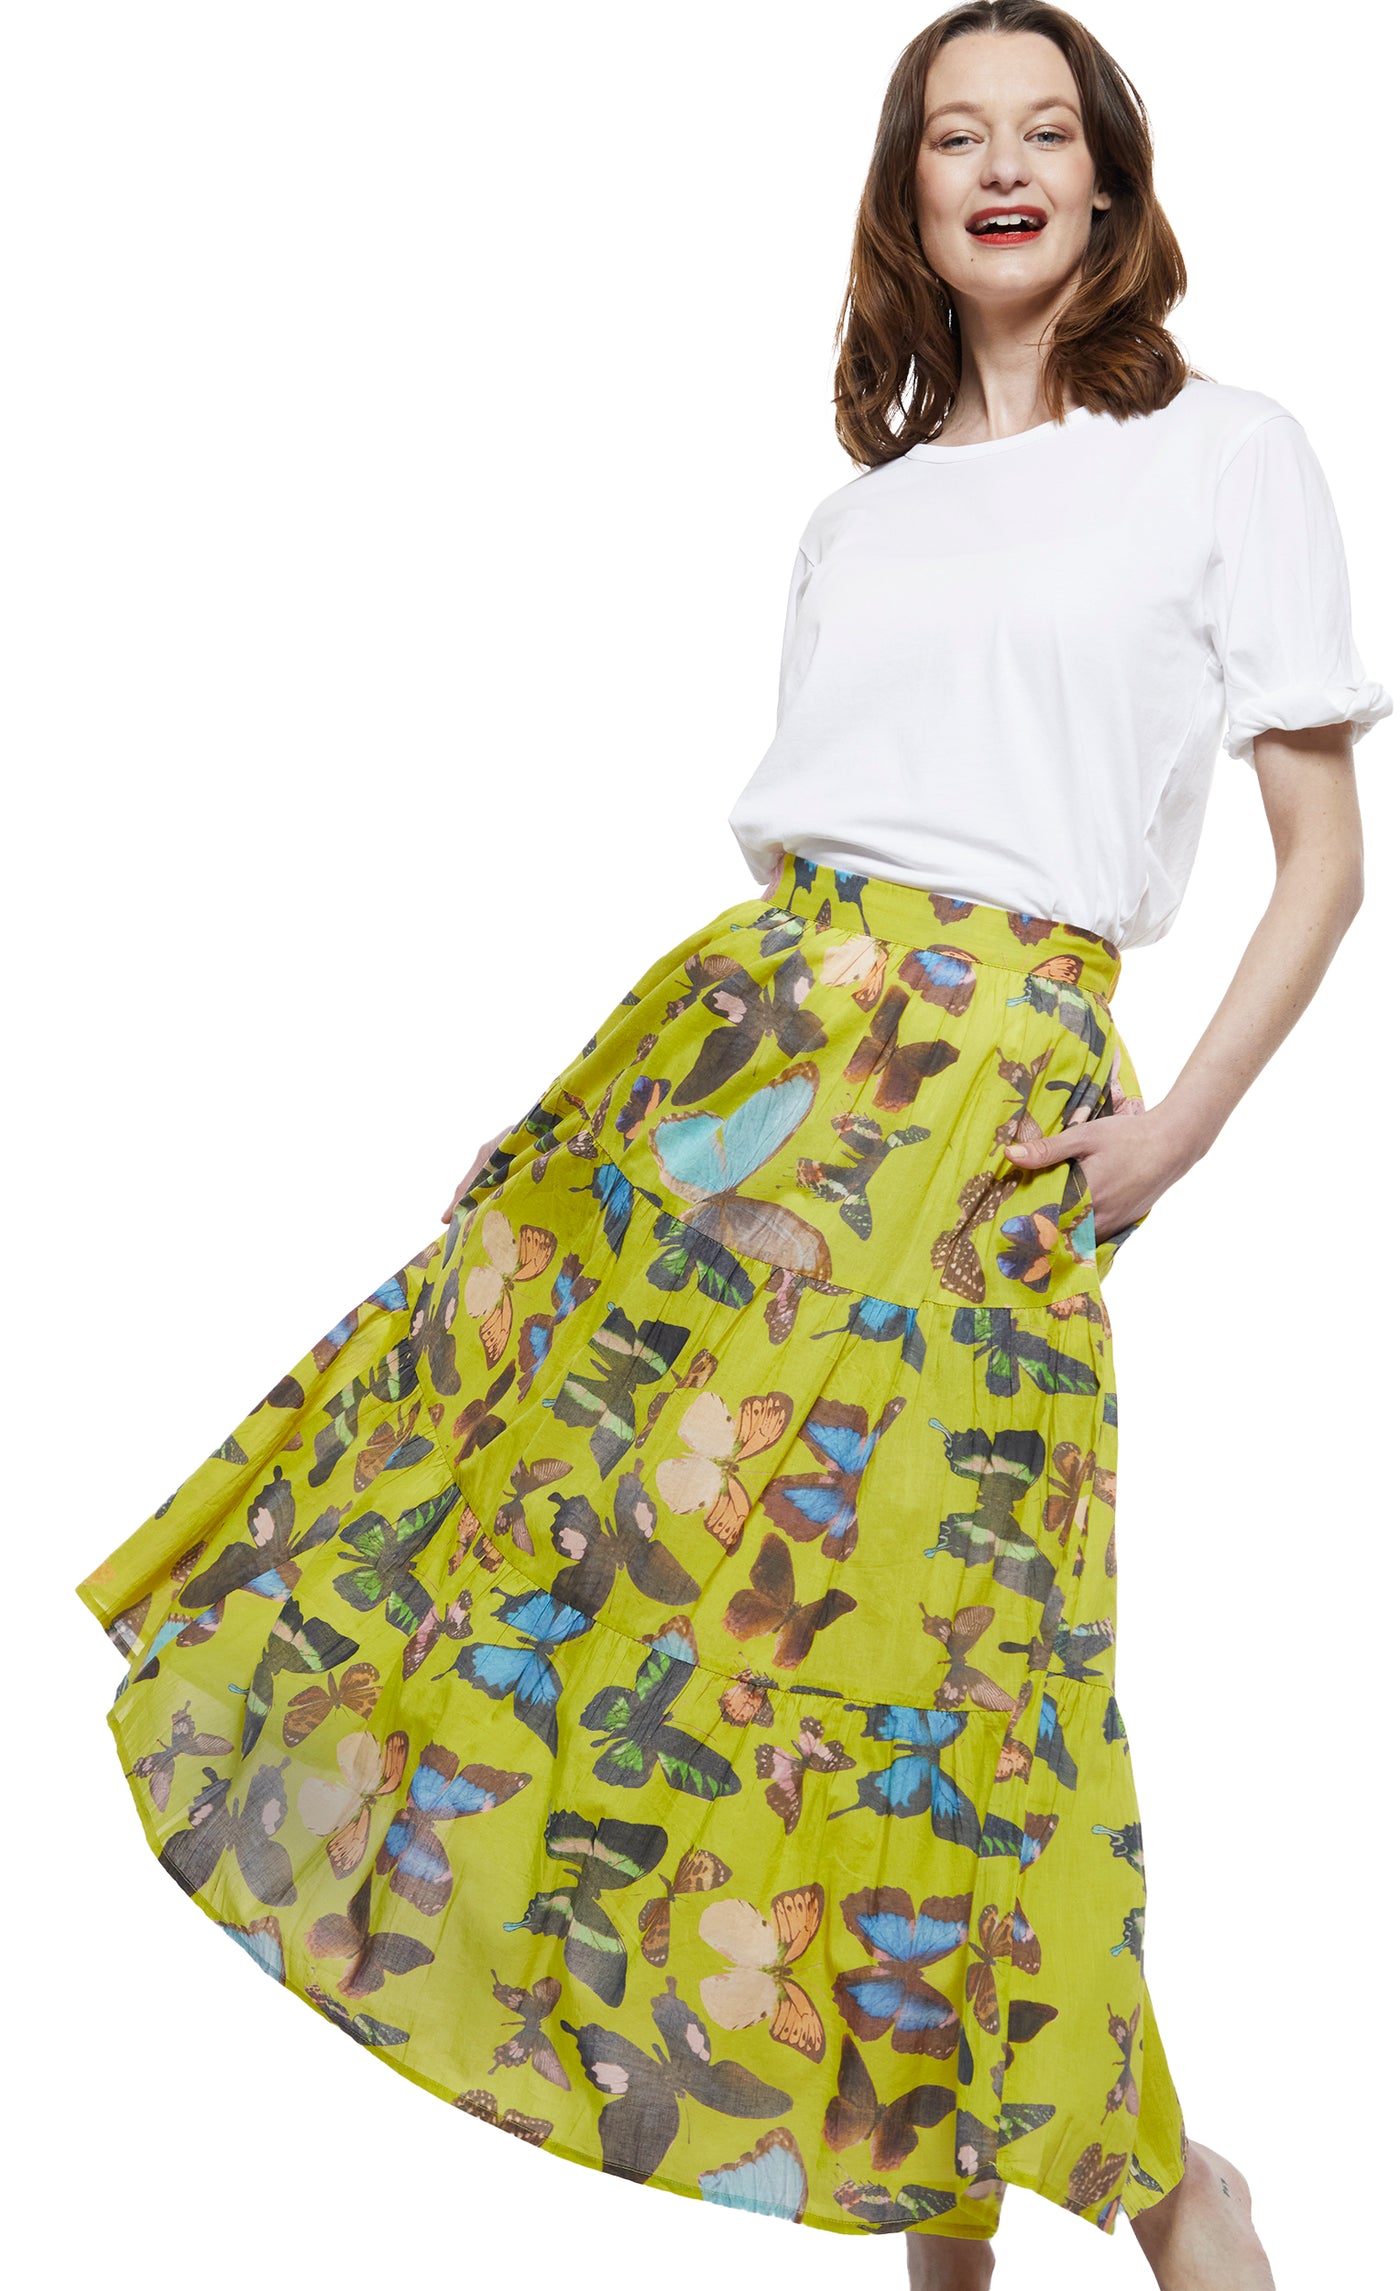 Woodstock Skirt in Chartreuse with Butterflies